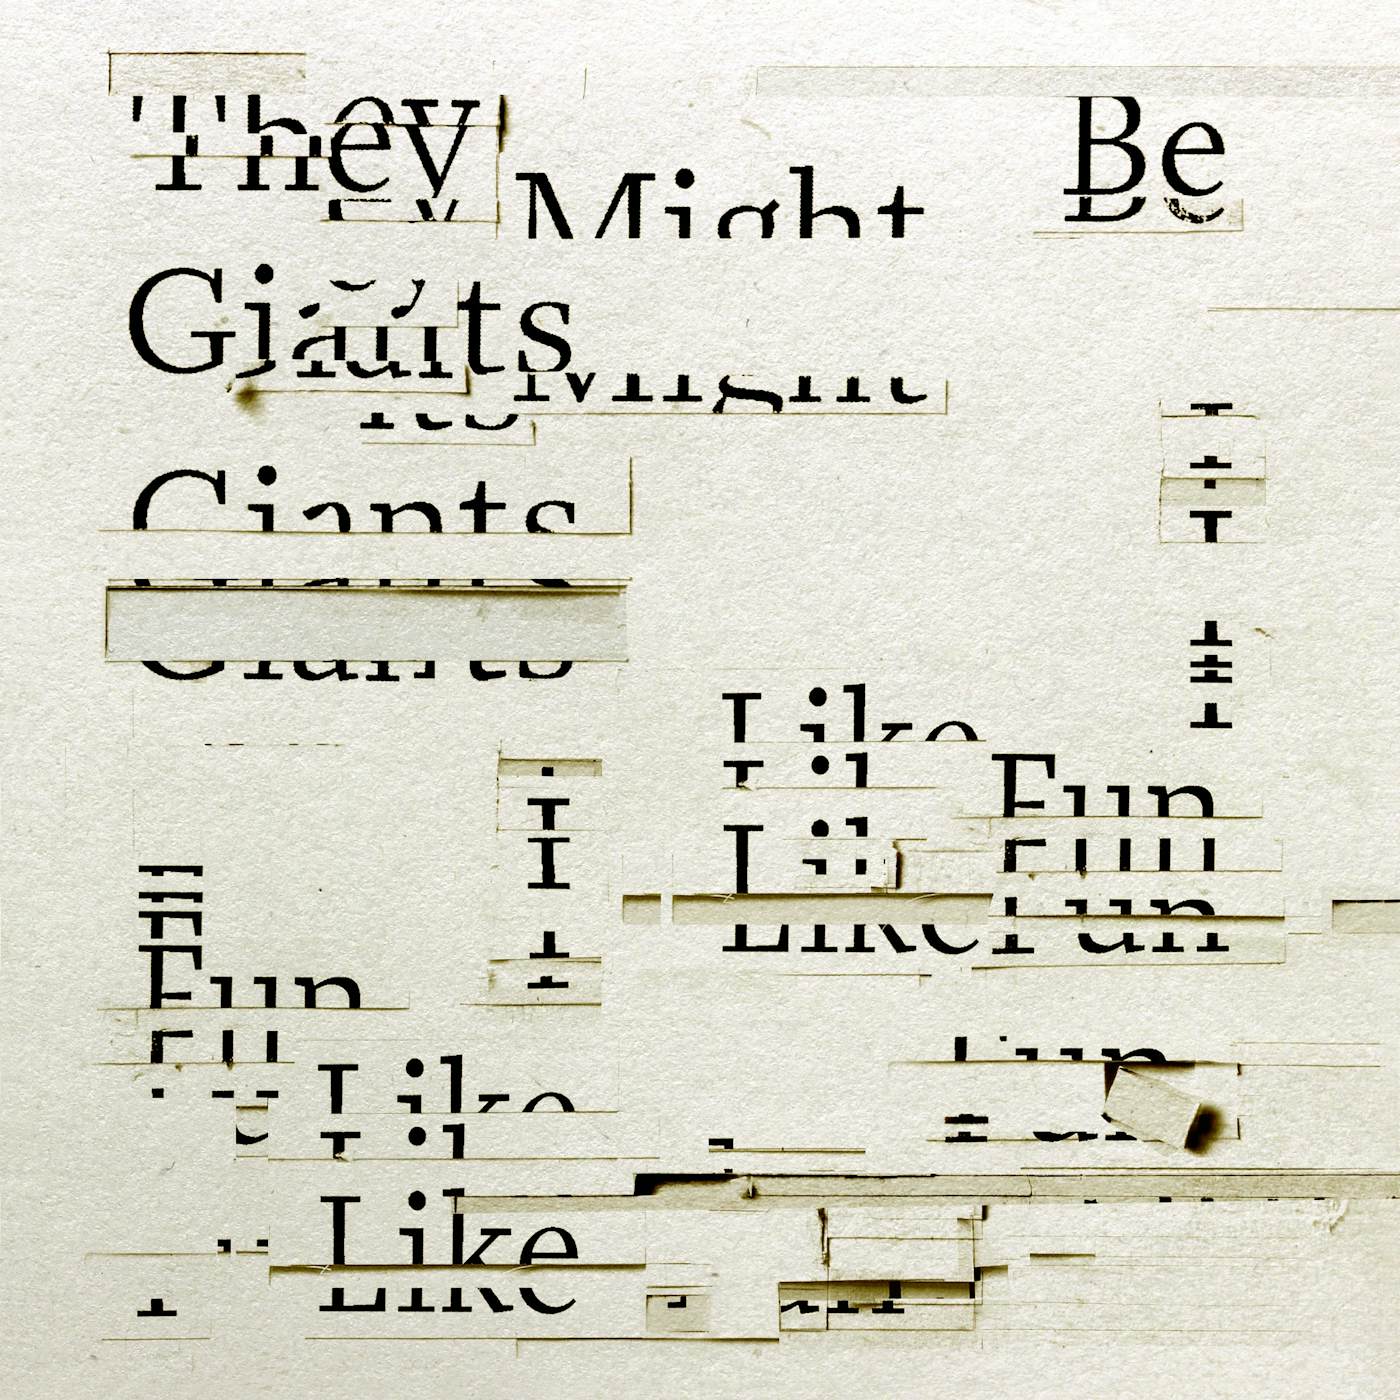 They Might Be Giants I Like Fun Clear With Black Wisp 180g Vinyl